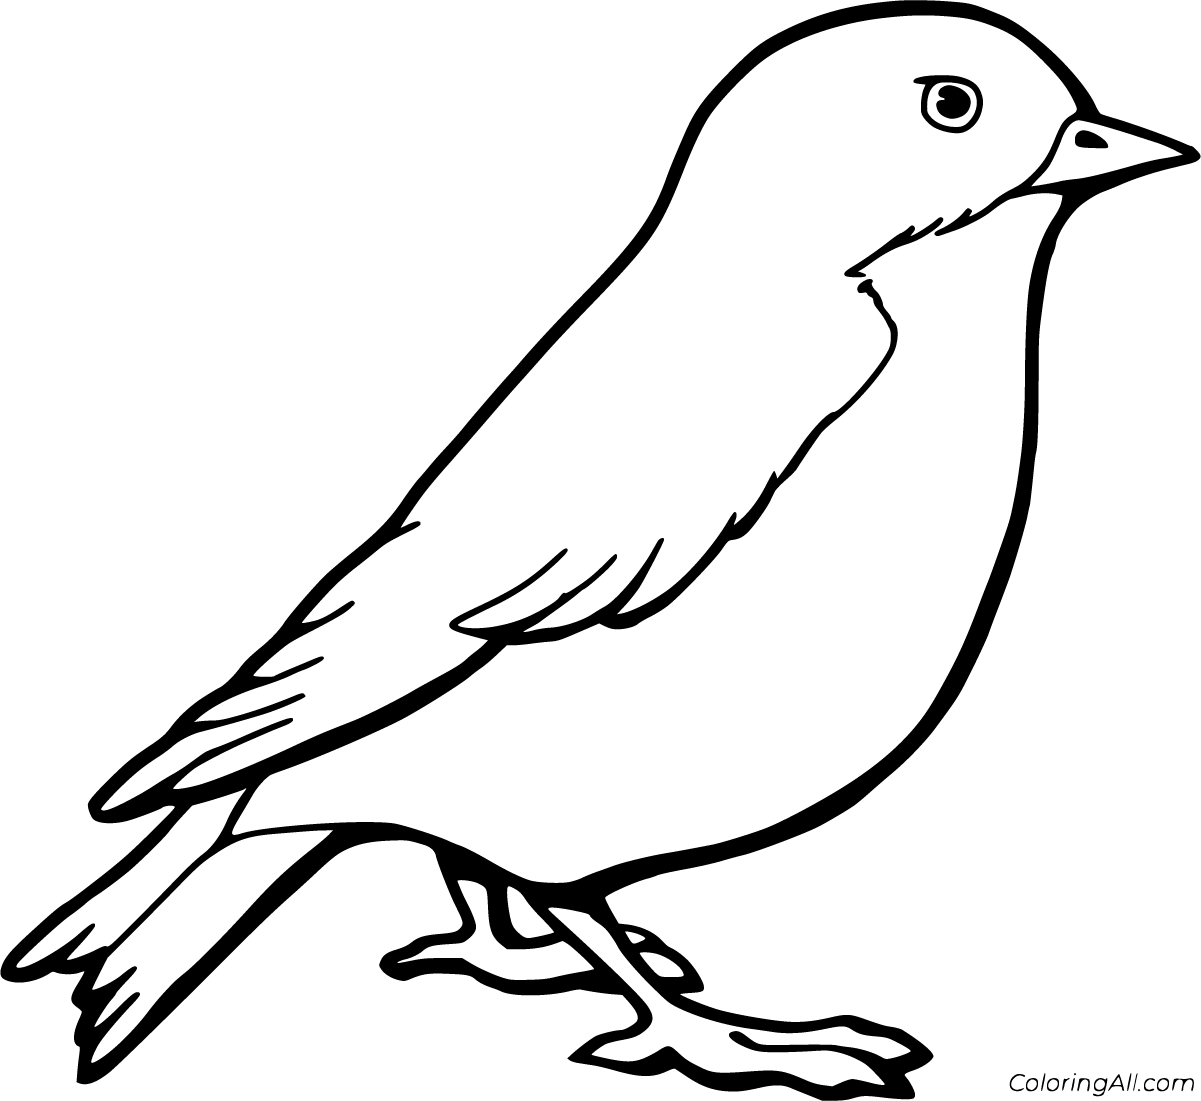 Robin Coloring Pages - ColoringAll